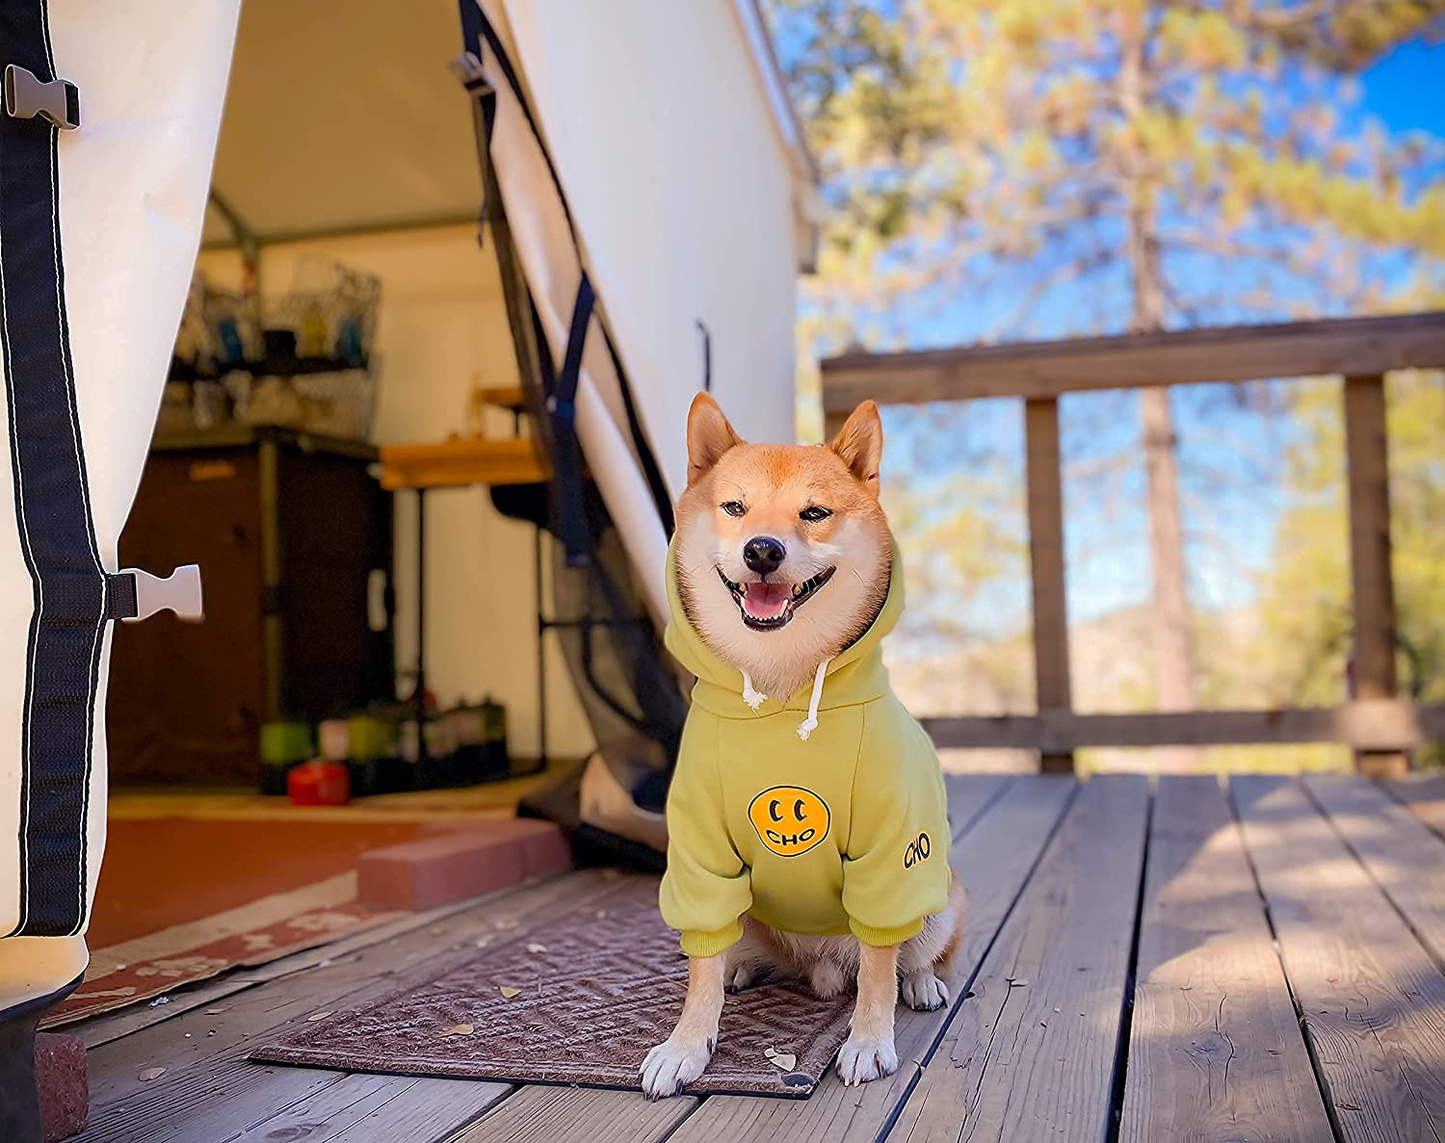 Chochocho Smile Dog Hoodie, Smiley Face Dog Sweater, Stylish Dog Clothes, Cotton Sweatshirt for Dogs and Puppies, Fashion Outfit for Dogs Cats Puppy Small Medium Large Animals & Pet Supplies > Pet Supplies > Dog Supplies > Dog Apparel ChoChoCho Pet Supplies   